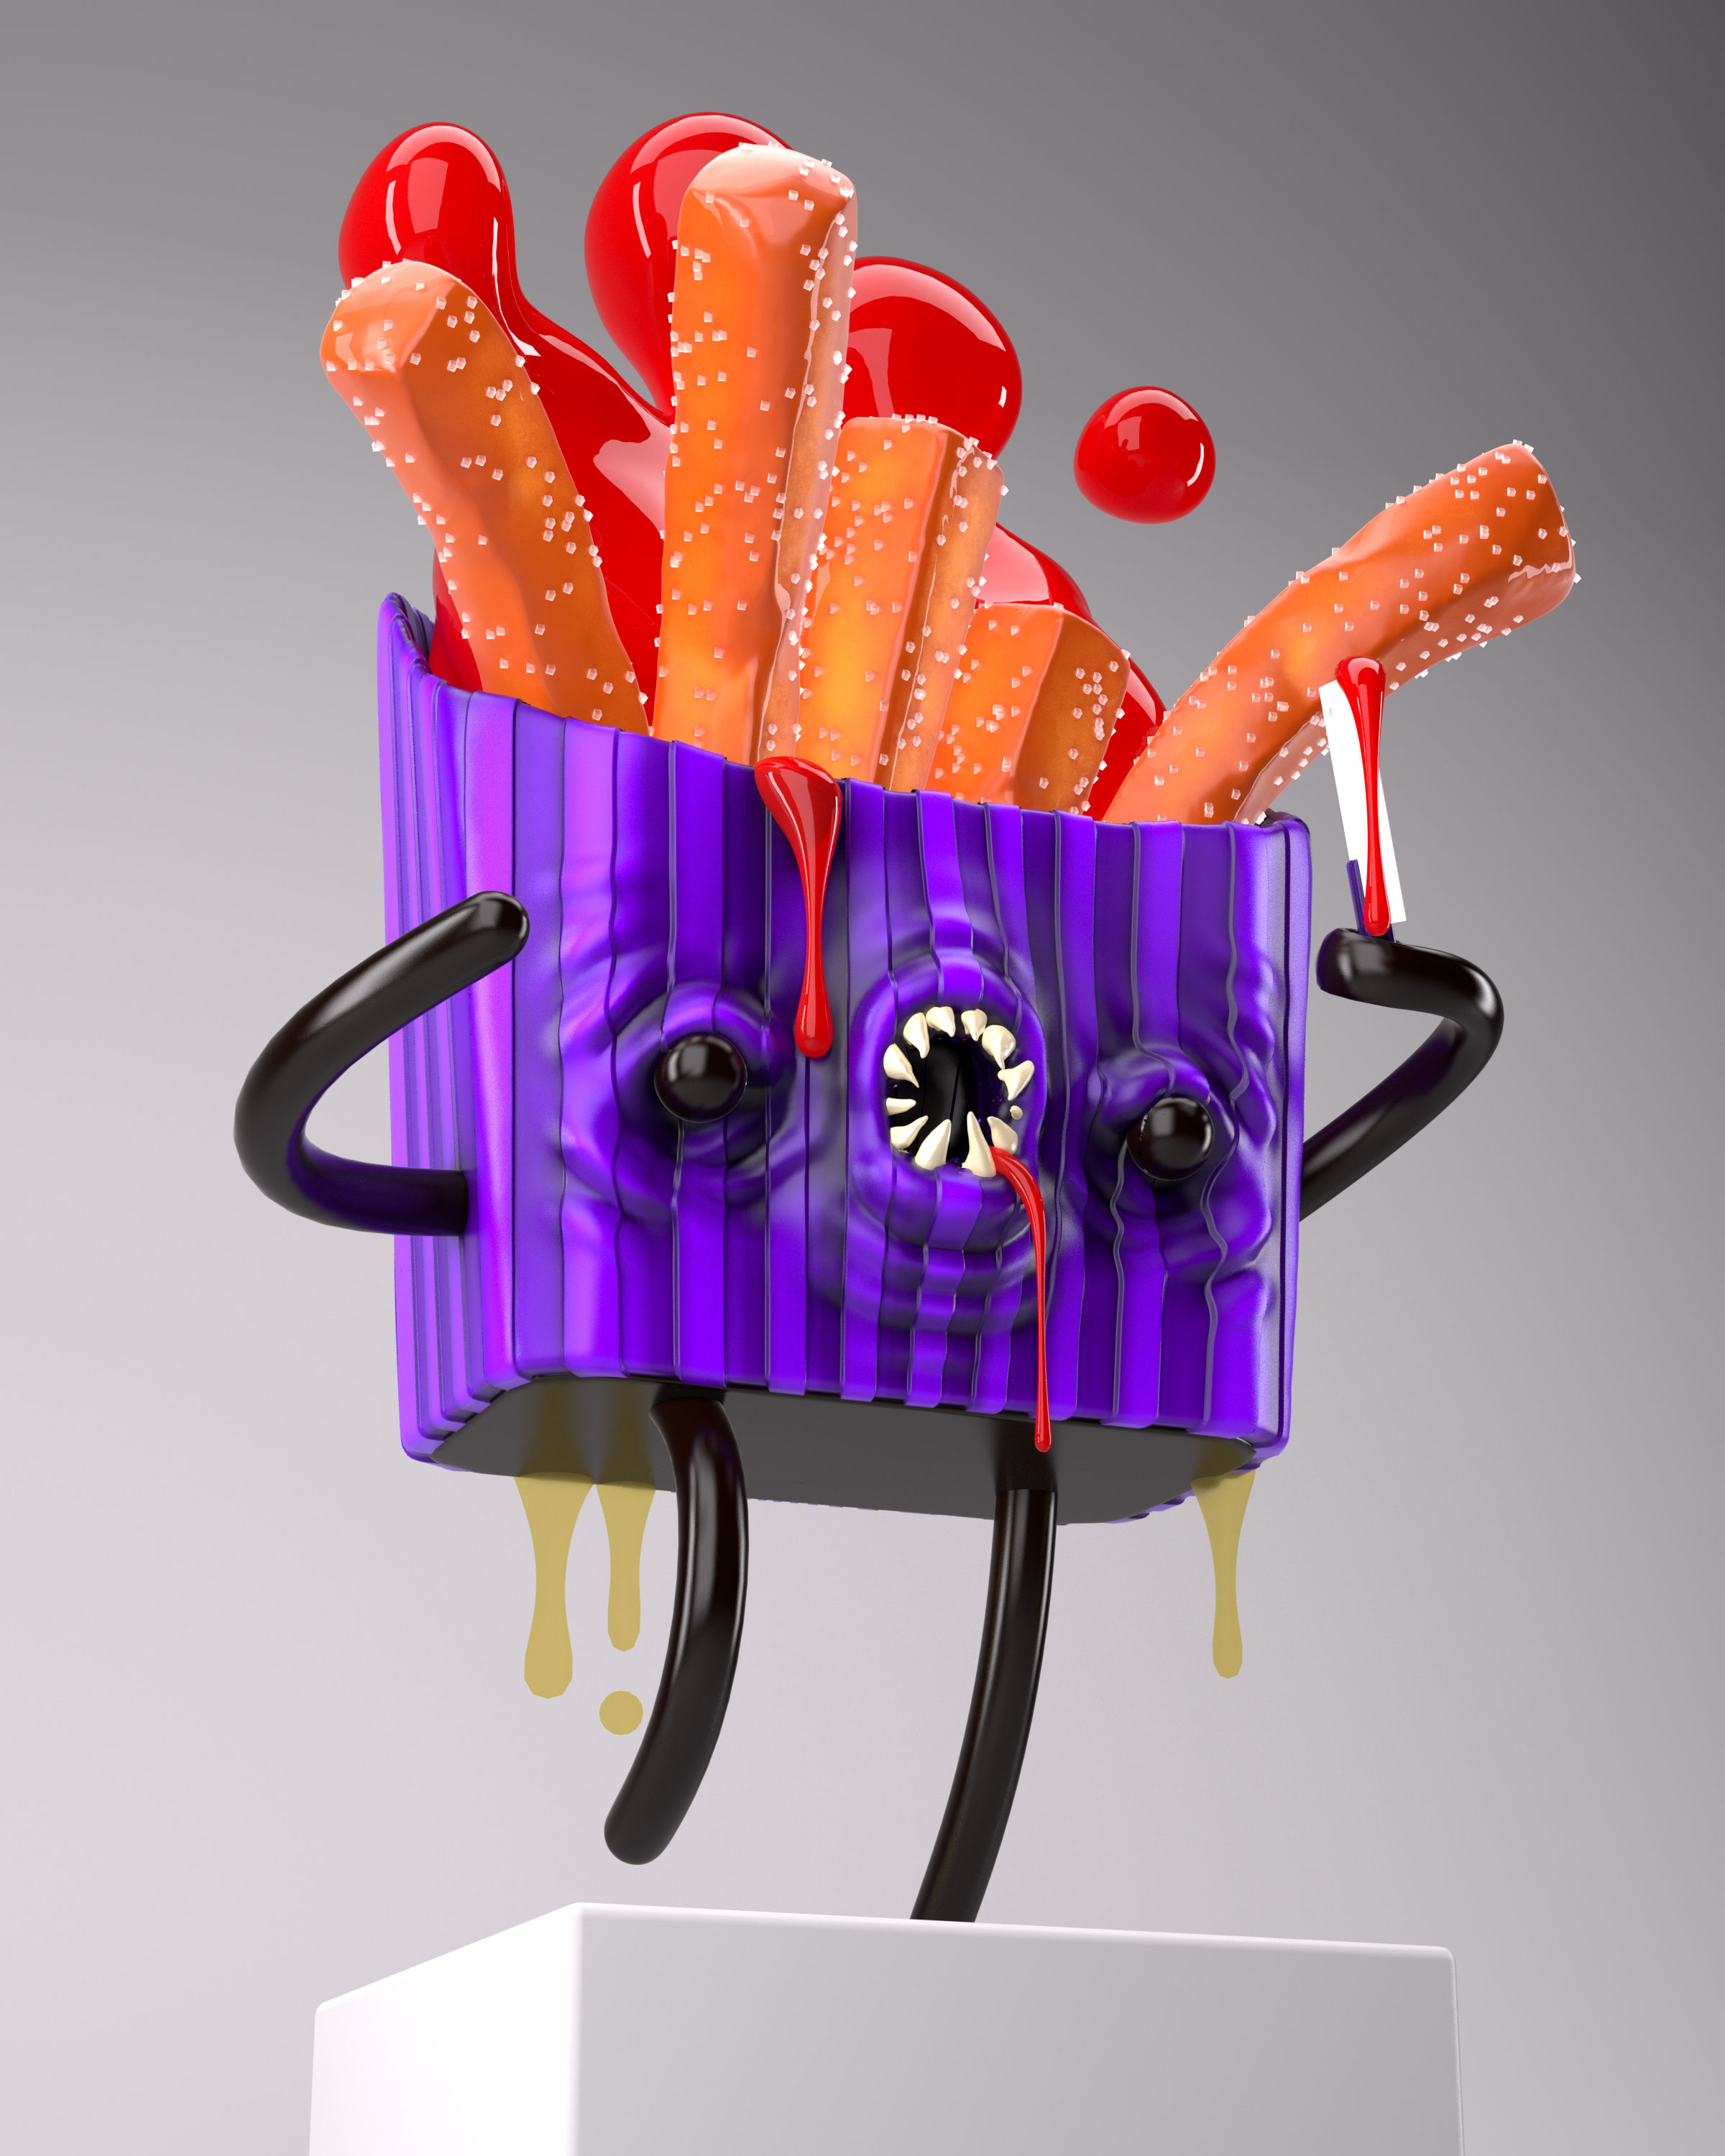 image of a toy french fry man